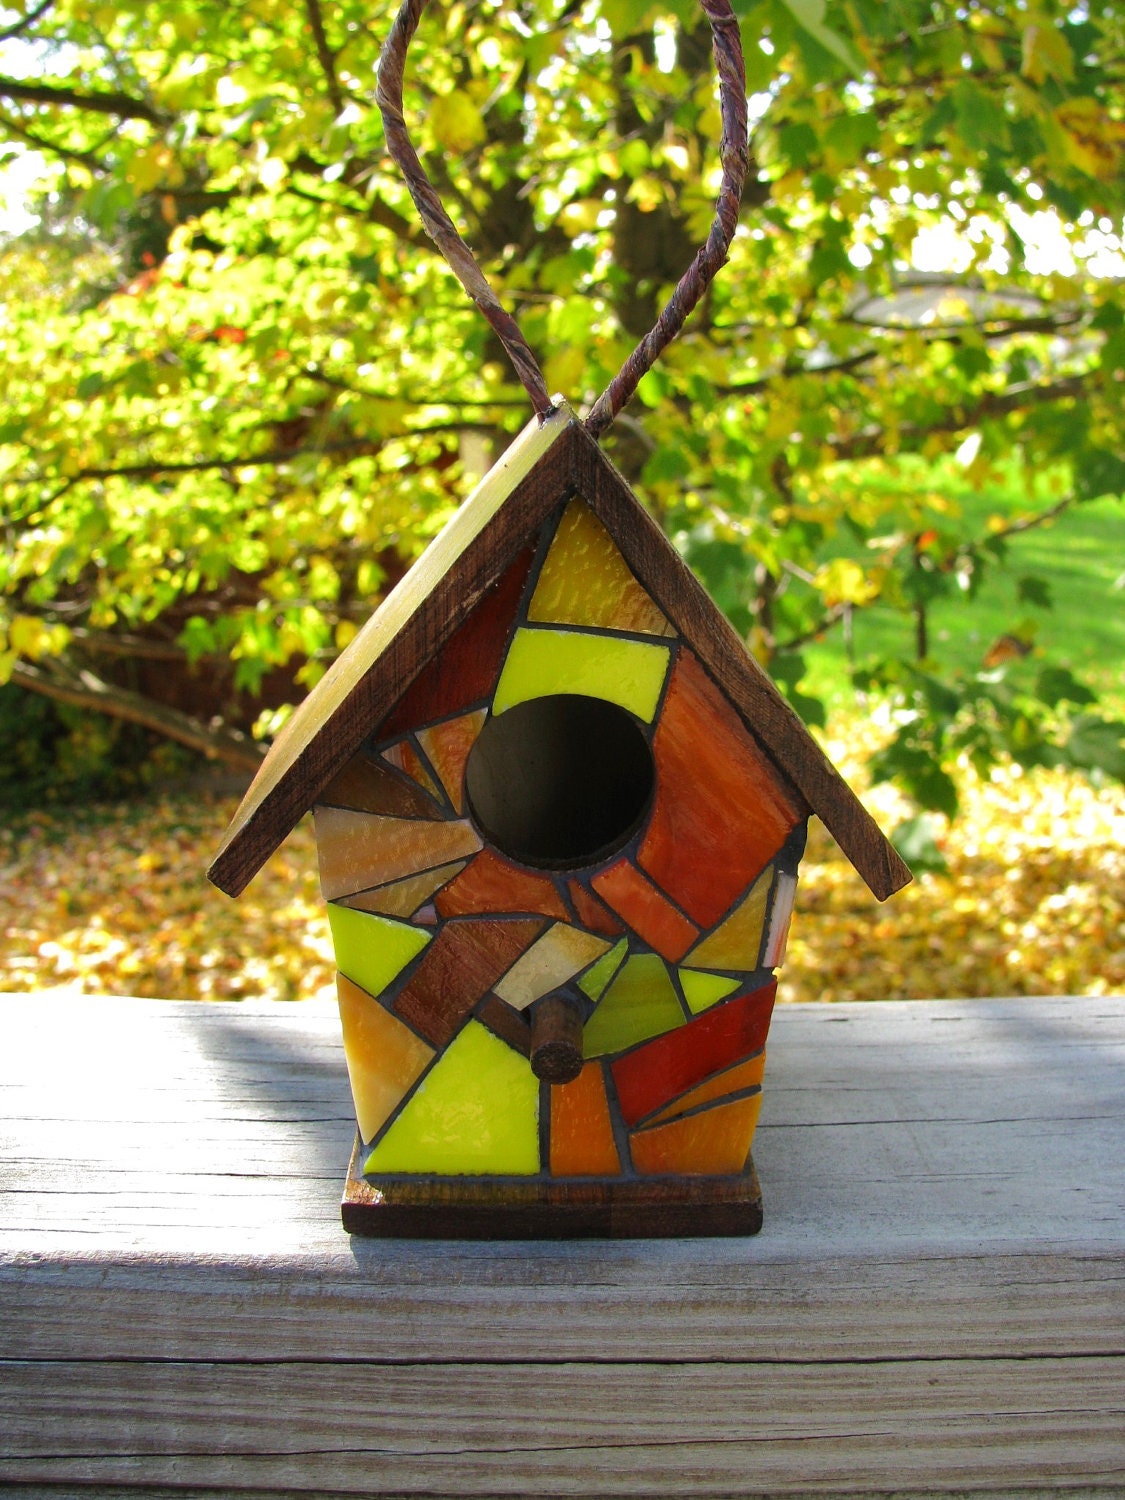 Stained Glass Mosaic Bird House by RedfordGlassStudio on Etsy